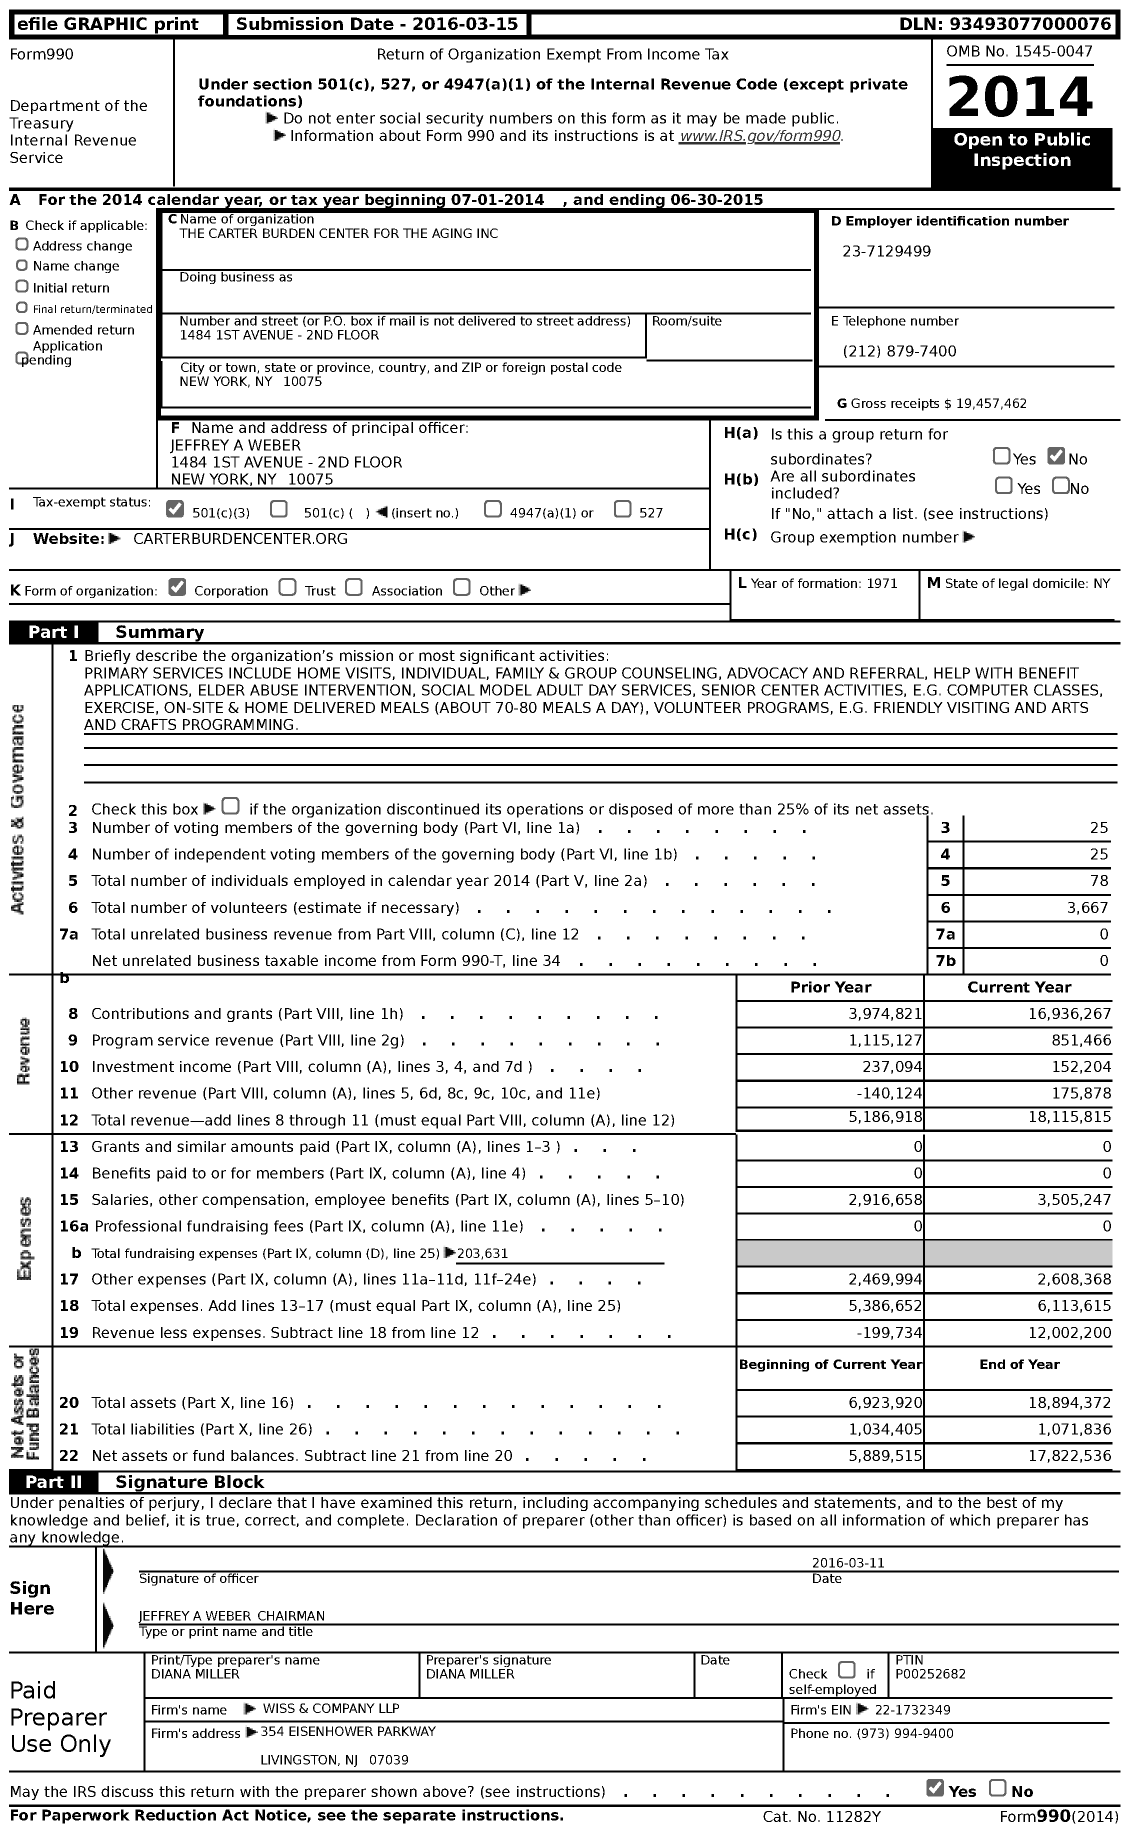 Image of first page of 2014 Form 990 for Carter Burden Network (CBCA)